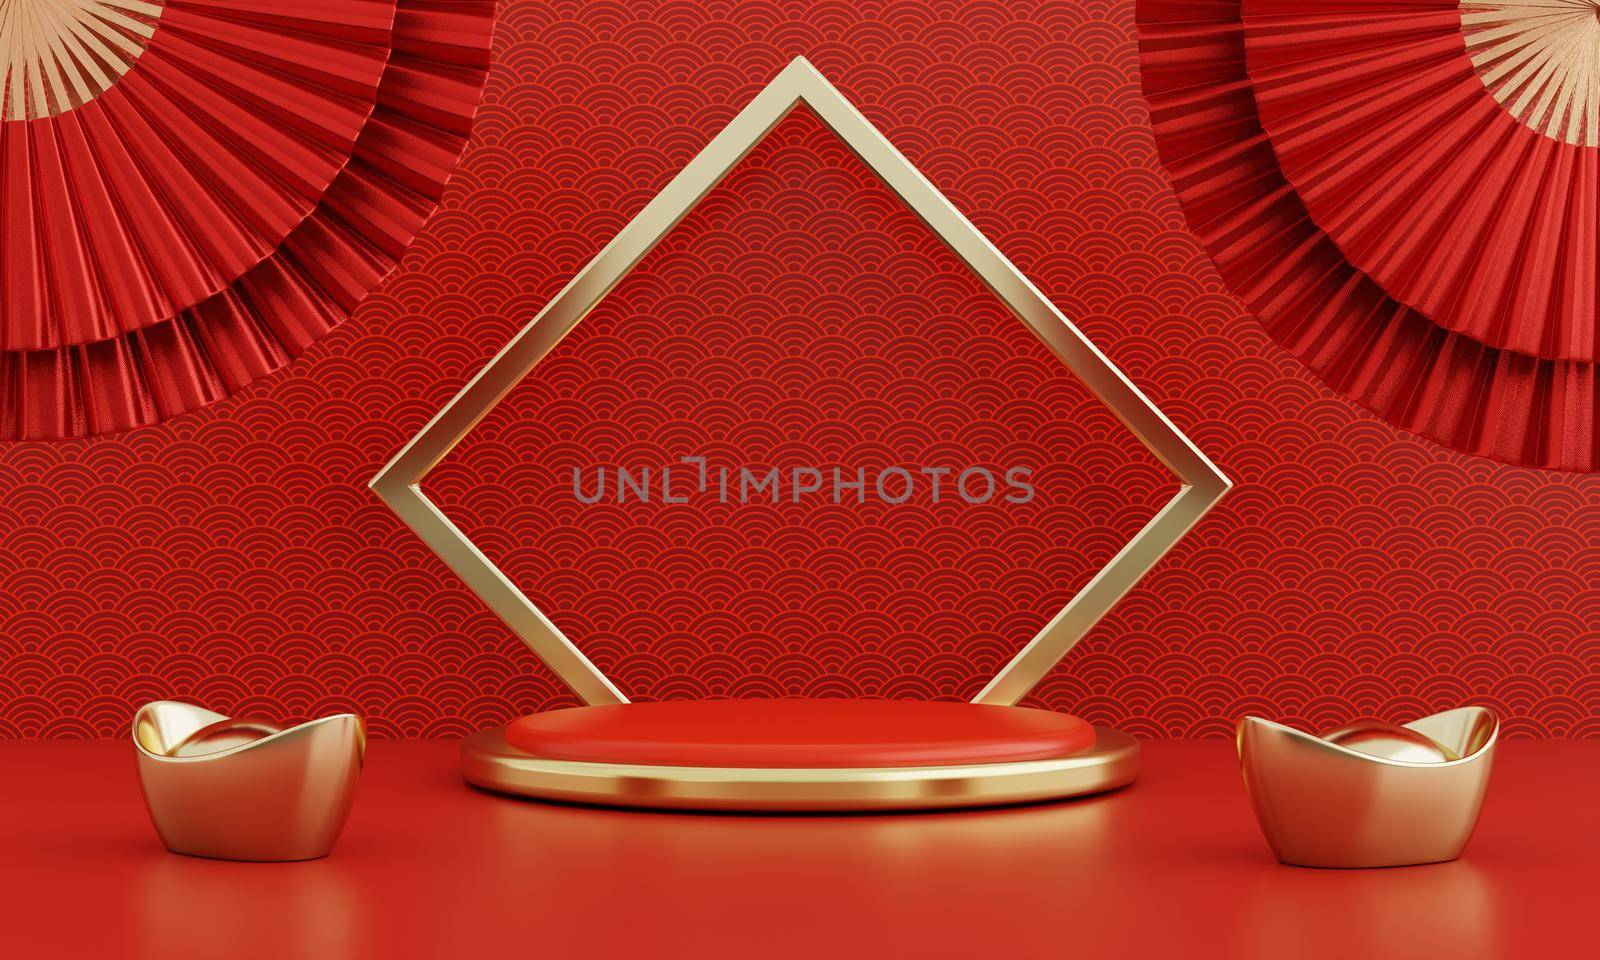 Chinese New Year red modern style one podium product showcase with golden ring frame and China pattern background. Happy holiday traditional festival concept. 3D illustration rendering graphic design